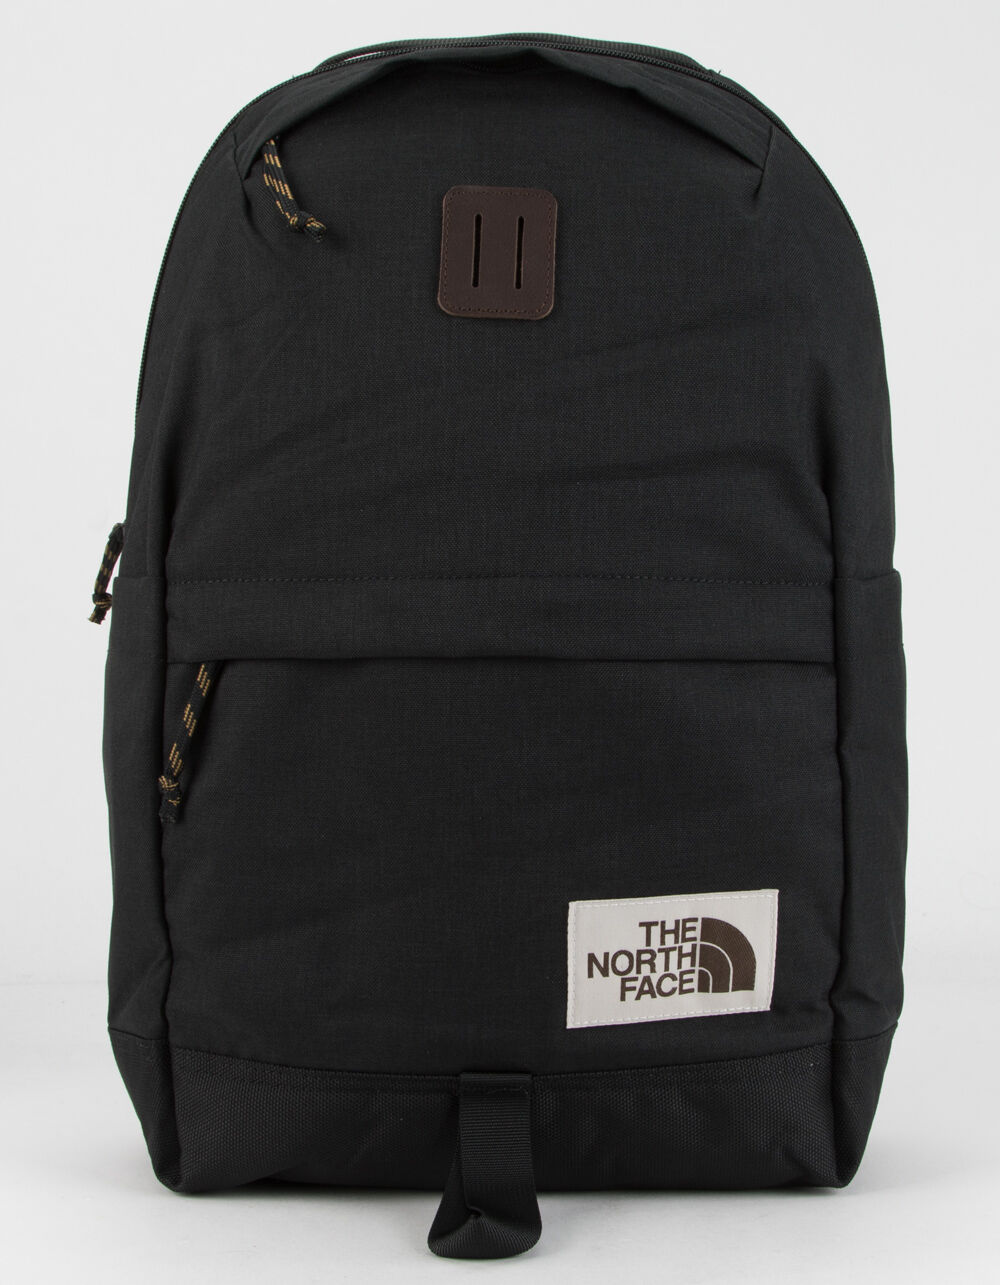 THE NORTH FACE Daypack Black Heather Backpack image number 0